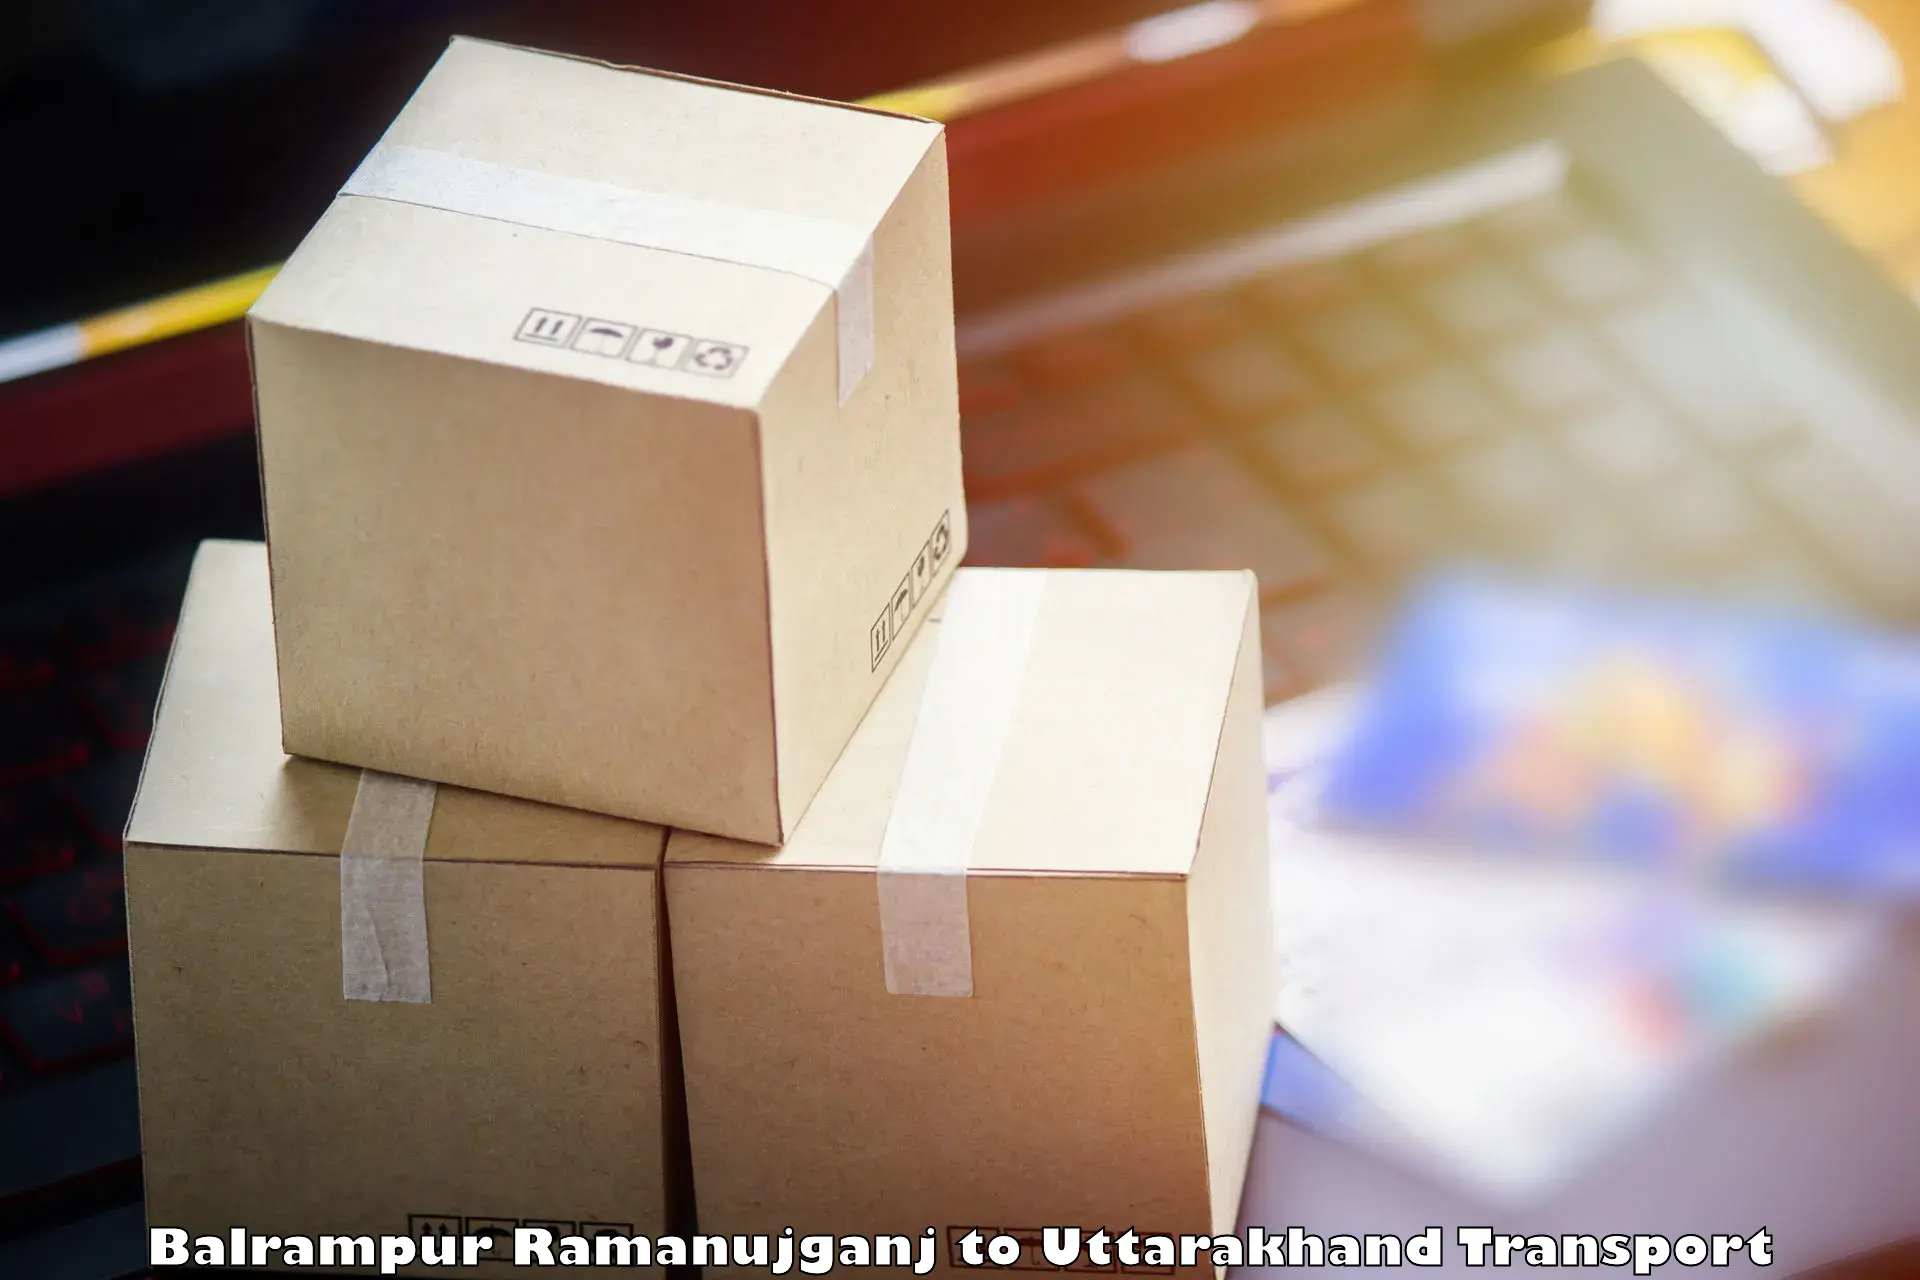 Package delivery services Balrampur Ramanujganj to Uttarakhand